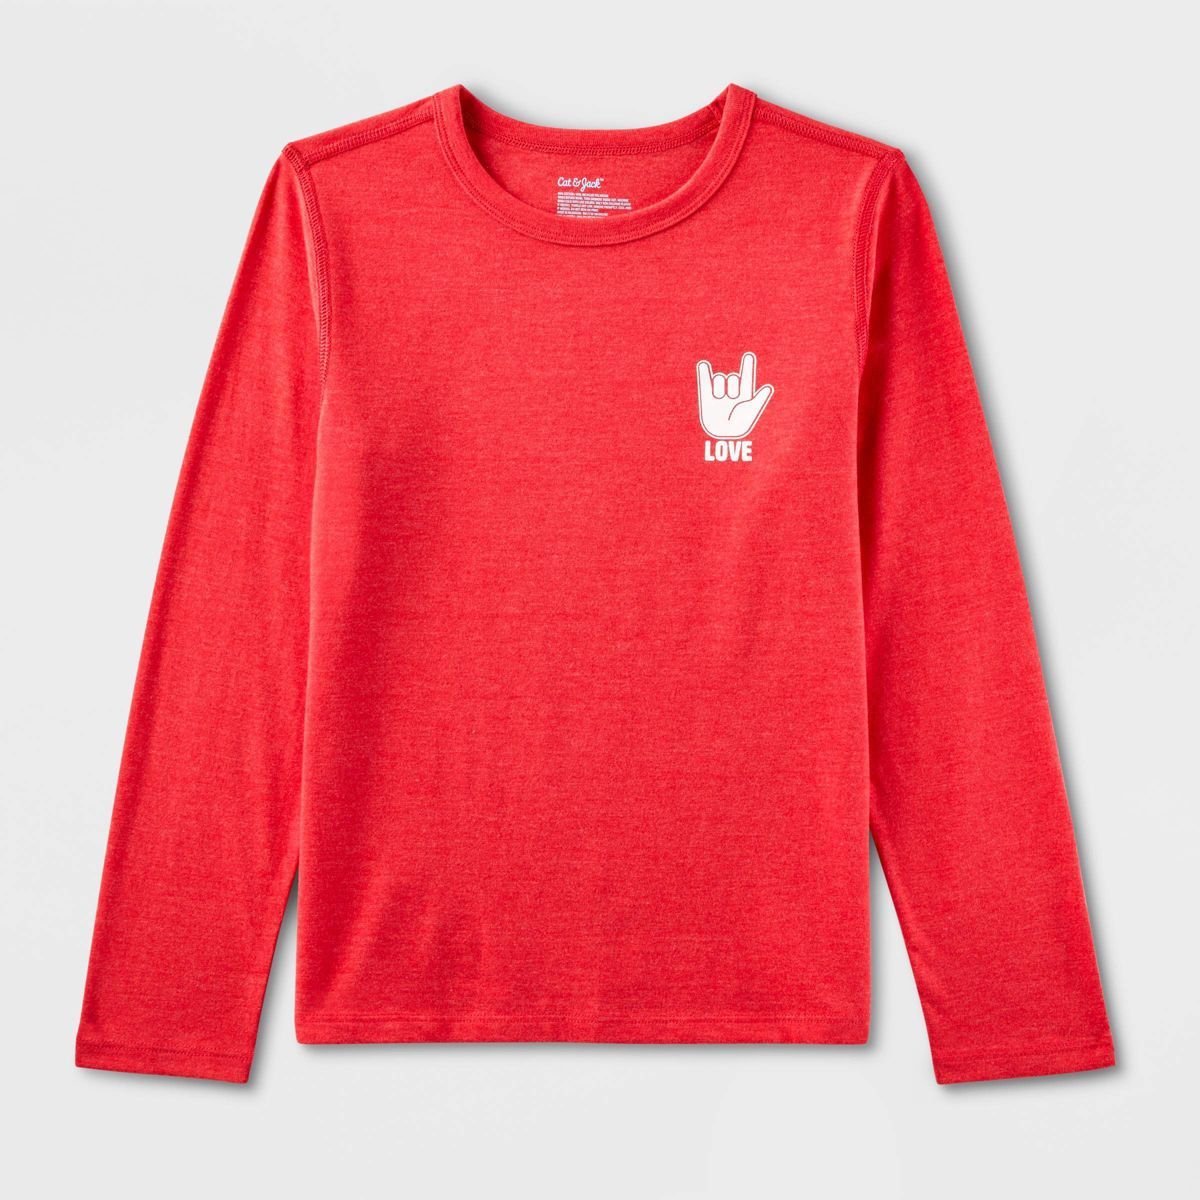 Kids' Adaptive 'Love' Long Sleeve Valentine's Day Graphic T-Shirt - Cat & Jack™ Red | Target